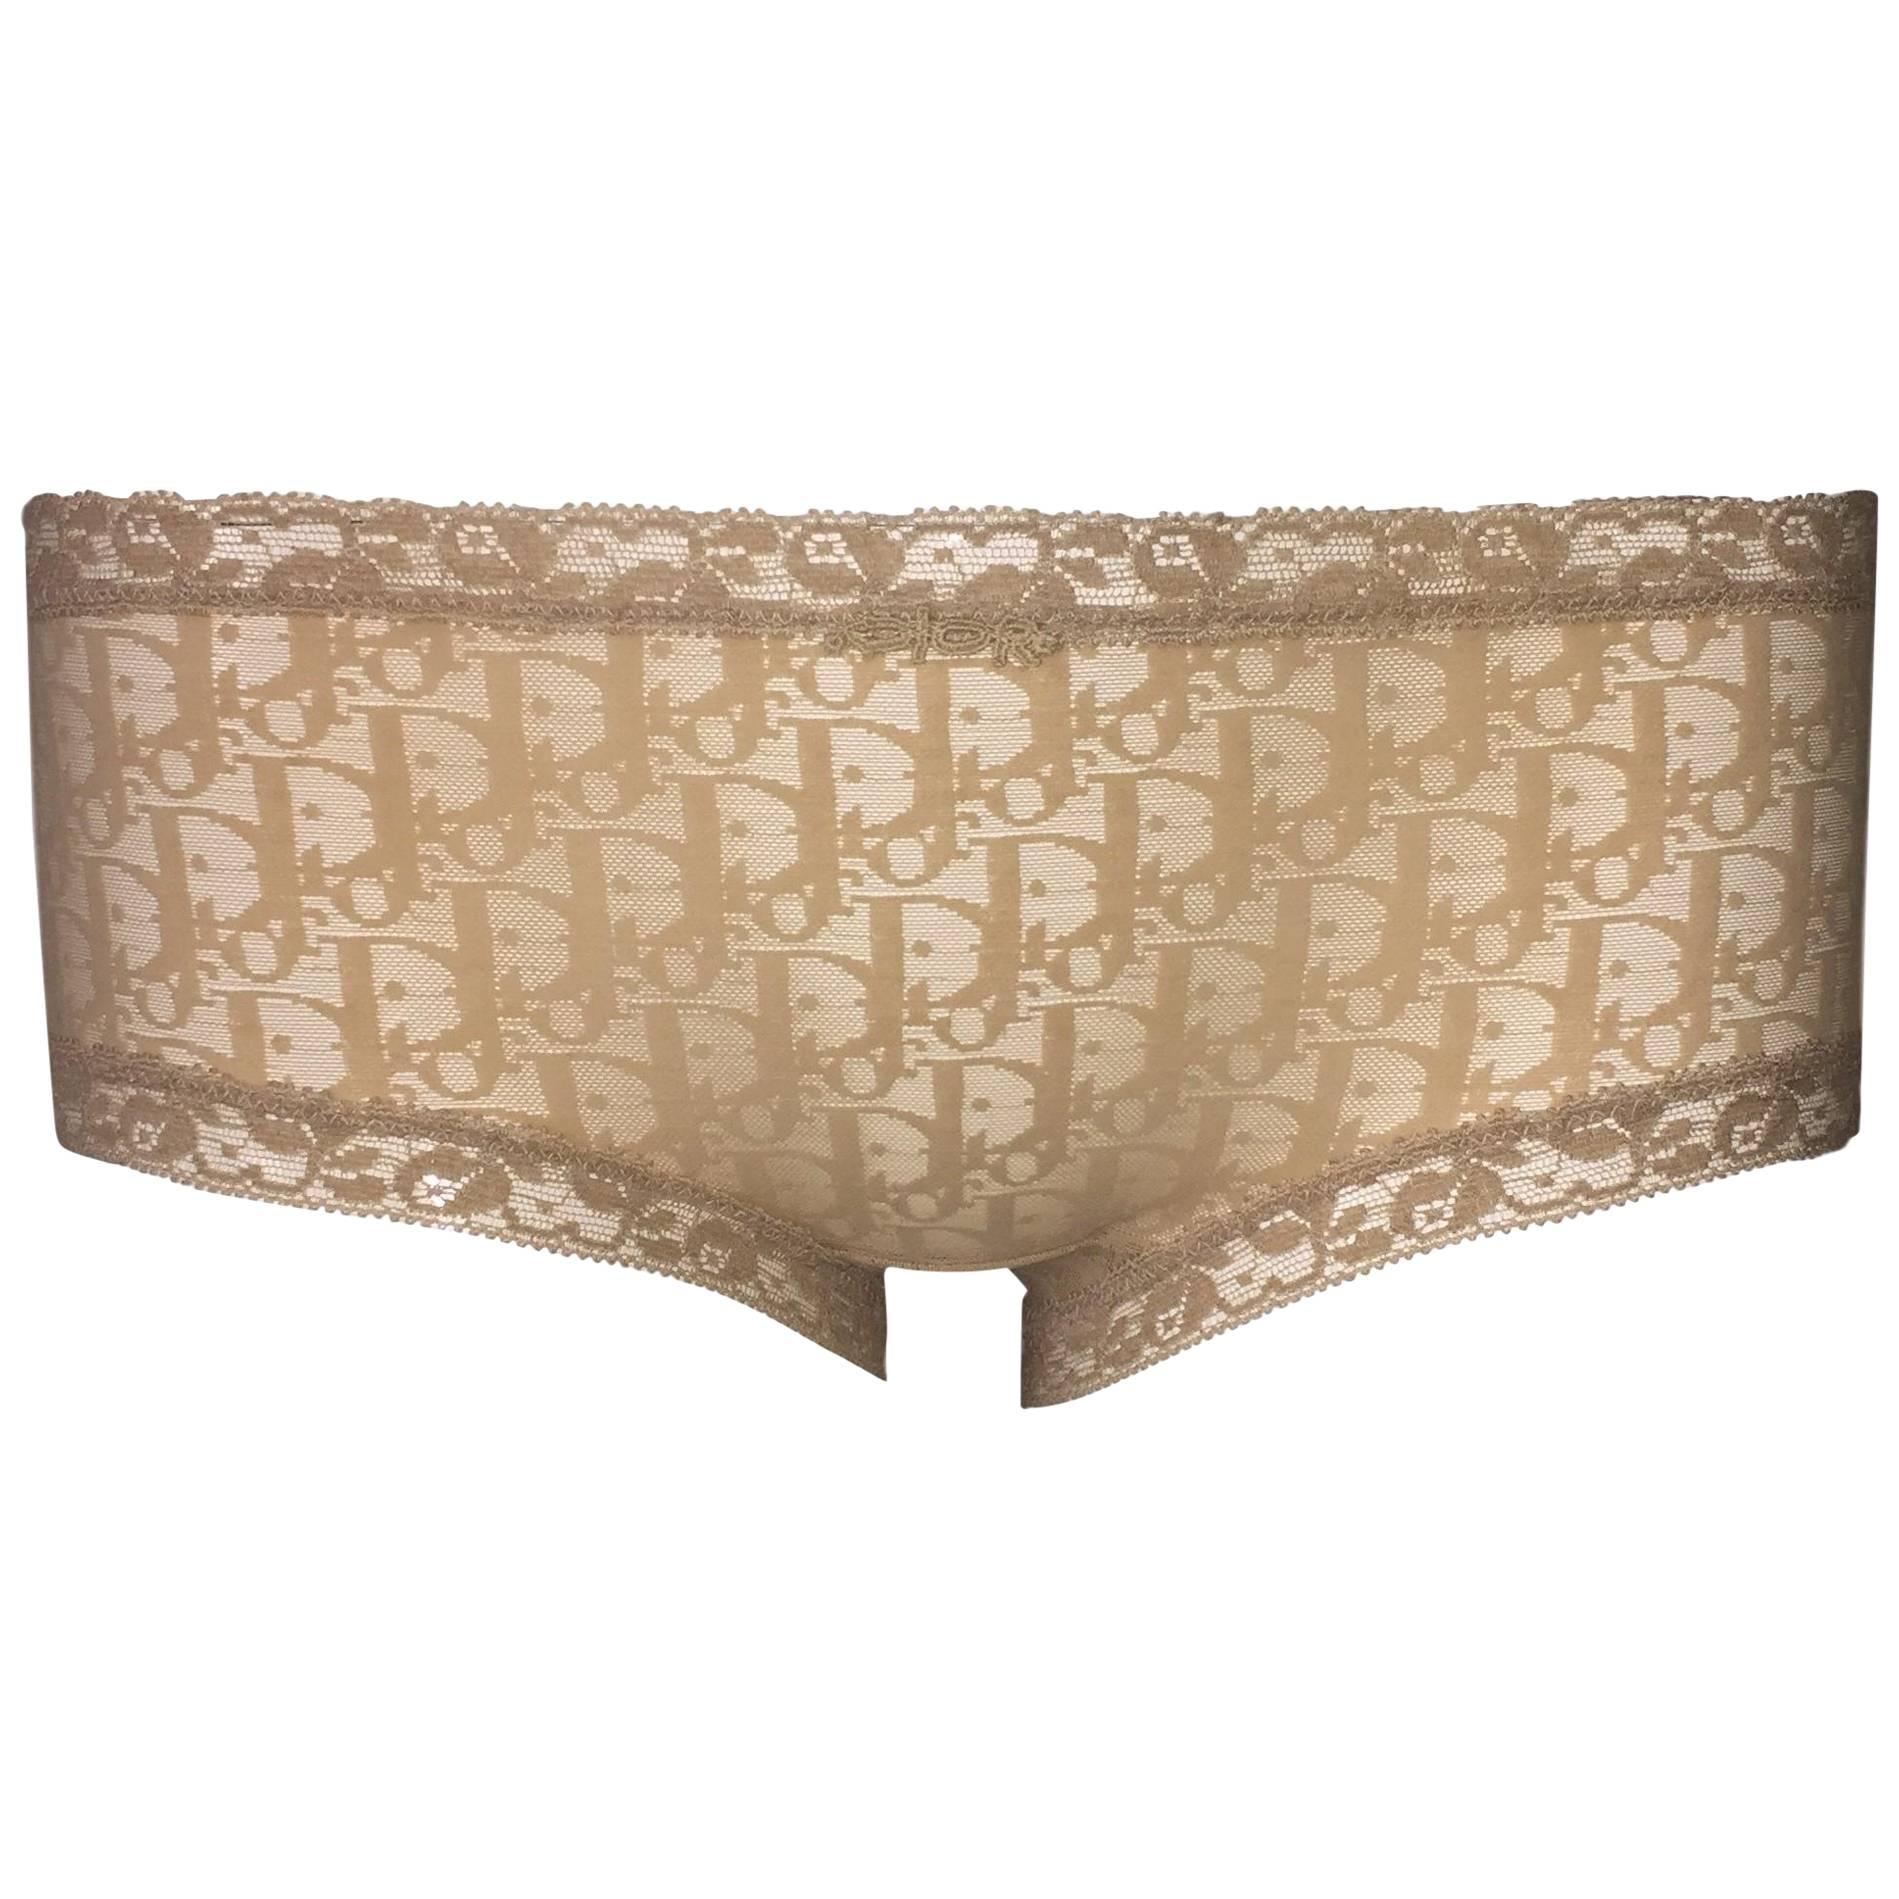 NWT 1990's Christian Dior Nude Mesh Monogram Lace Low Rise Panties